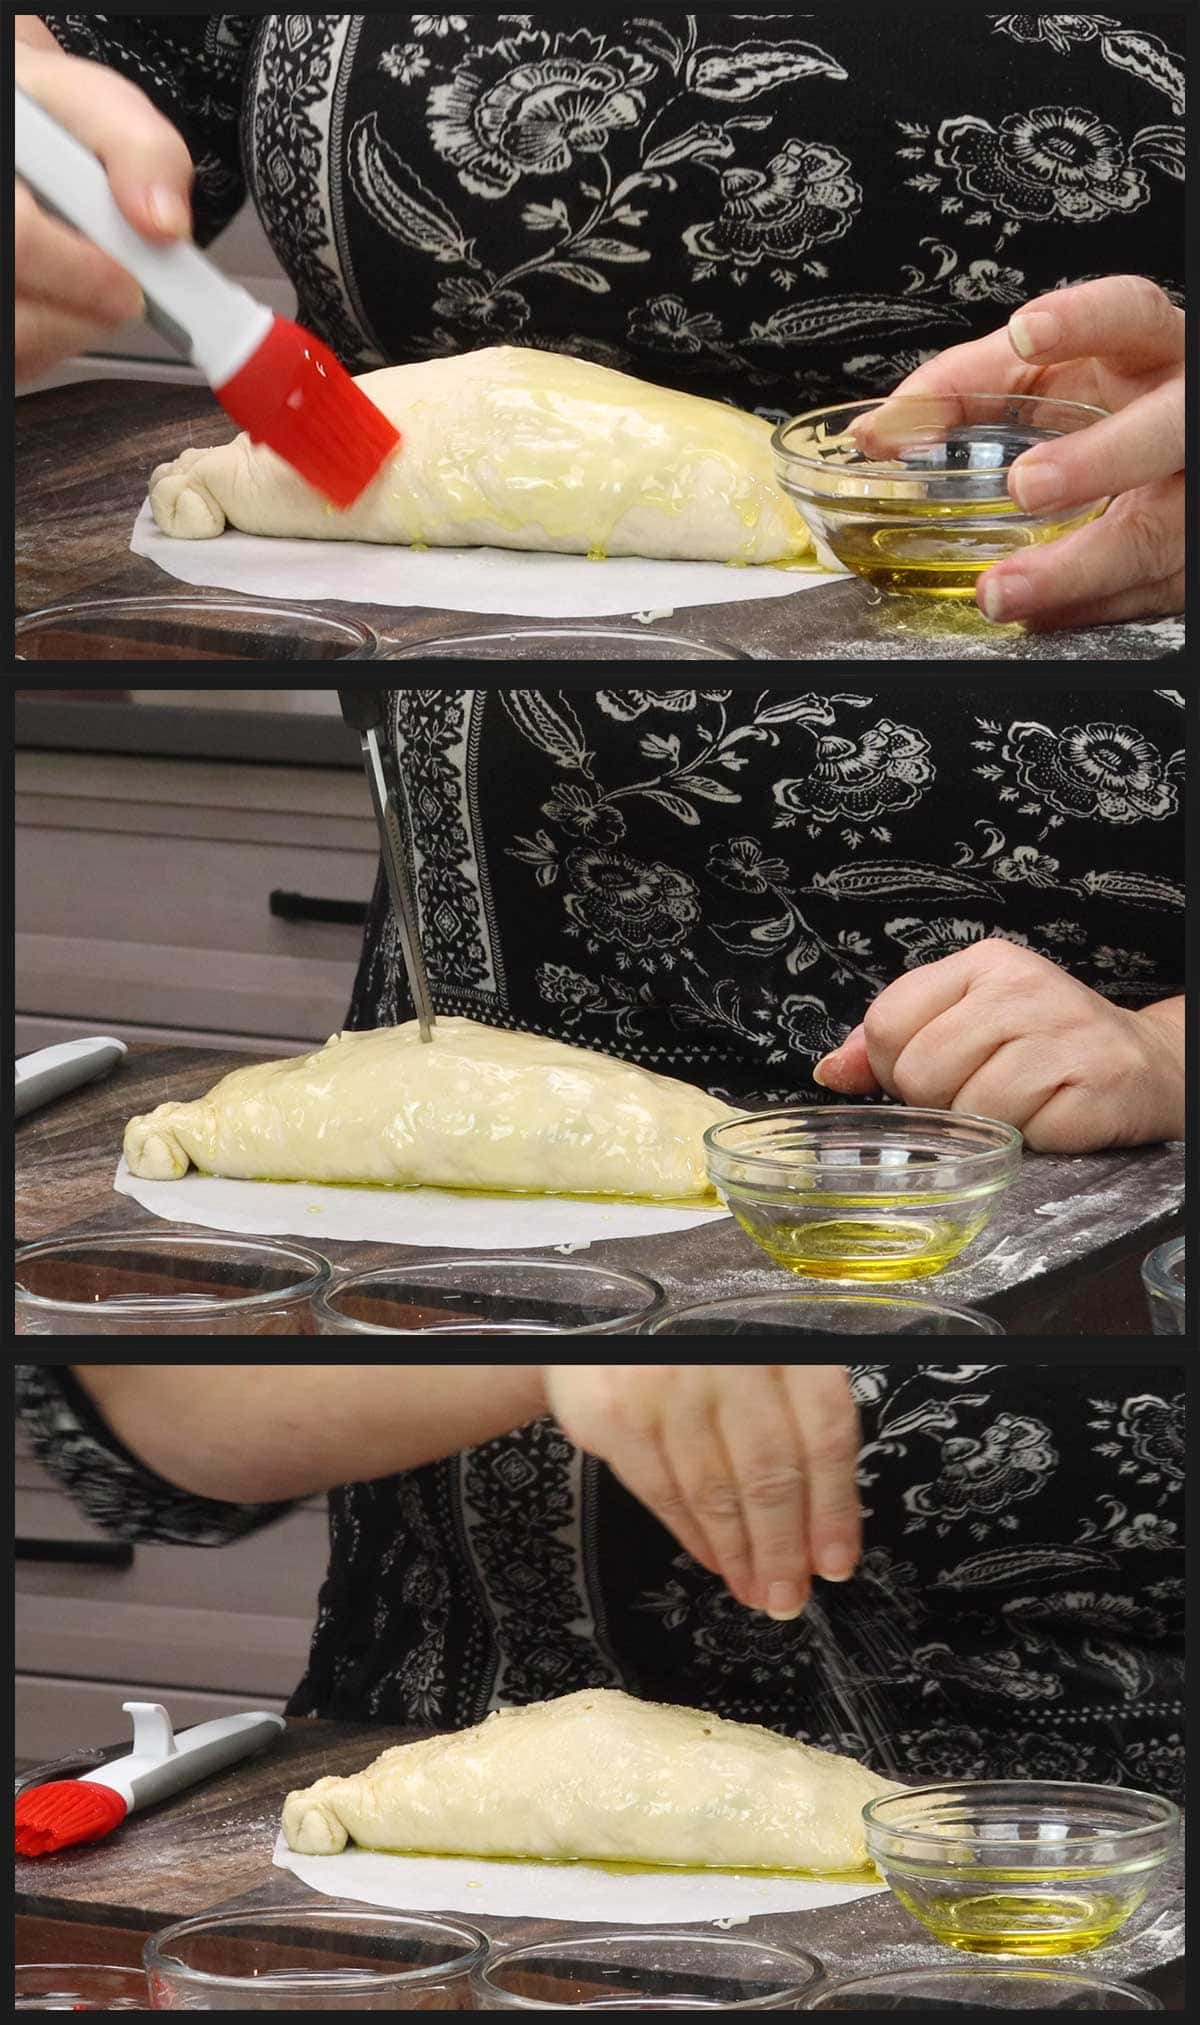 brushing the calzone with oil and cutting slits in the top.